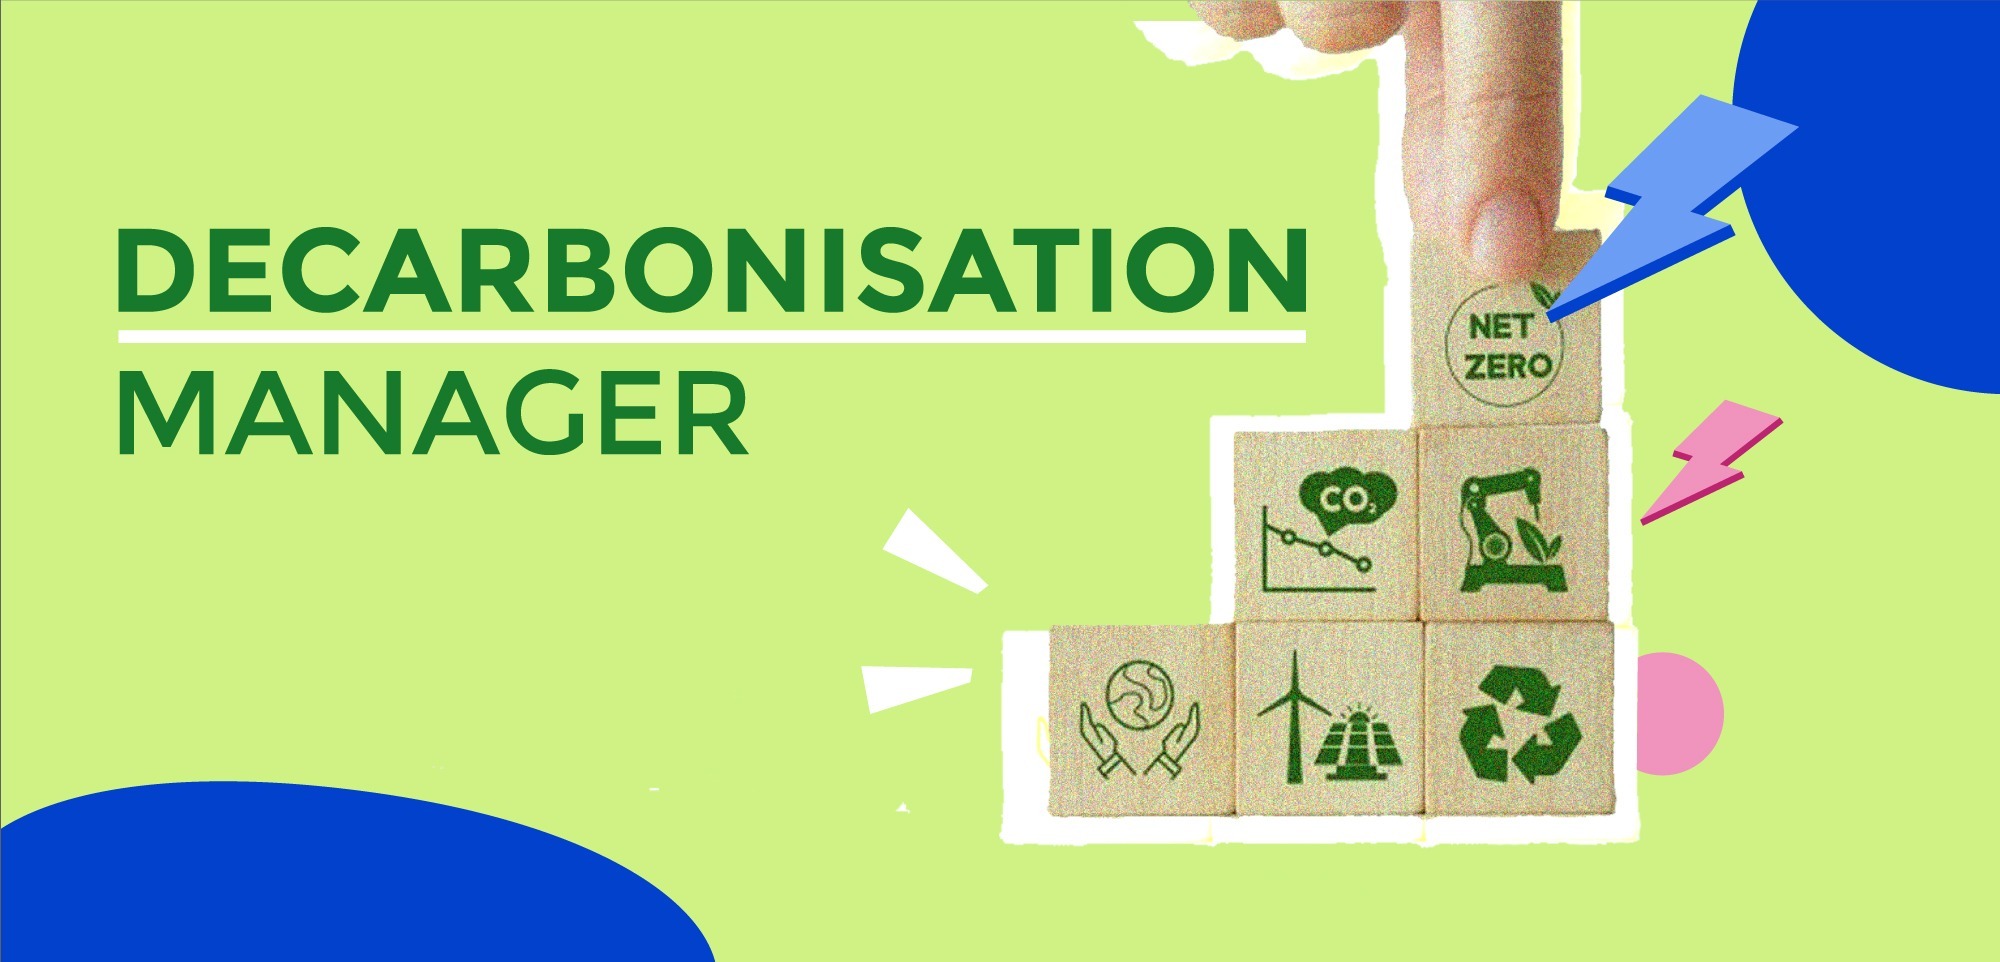 Decarbonisation Manager